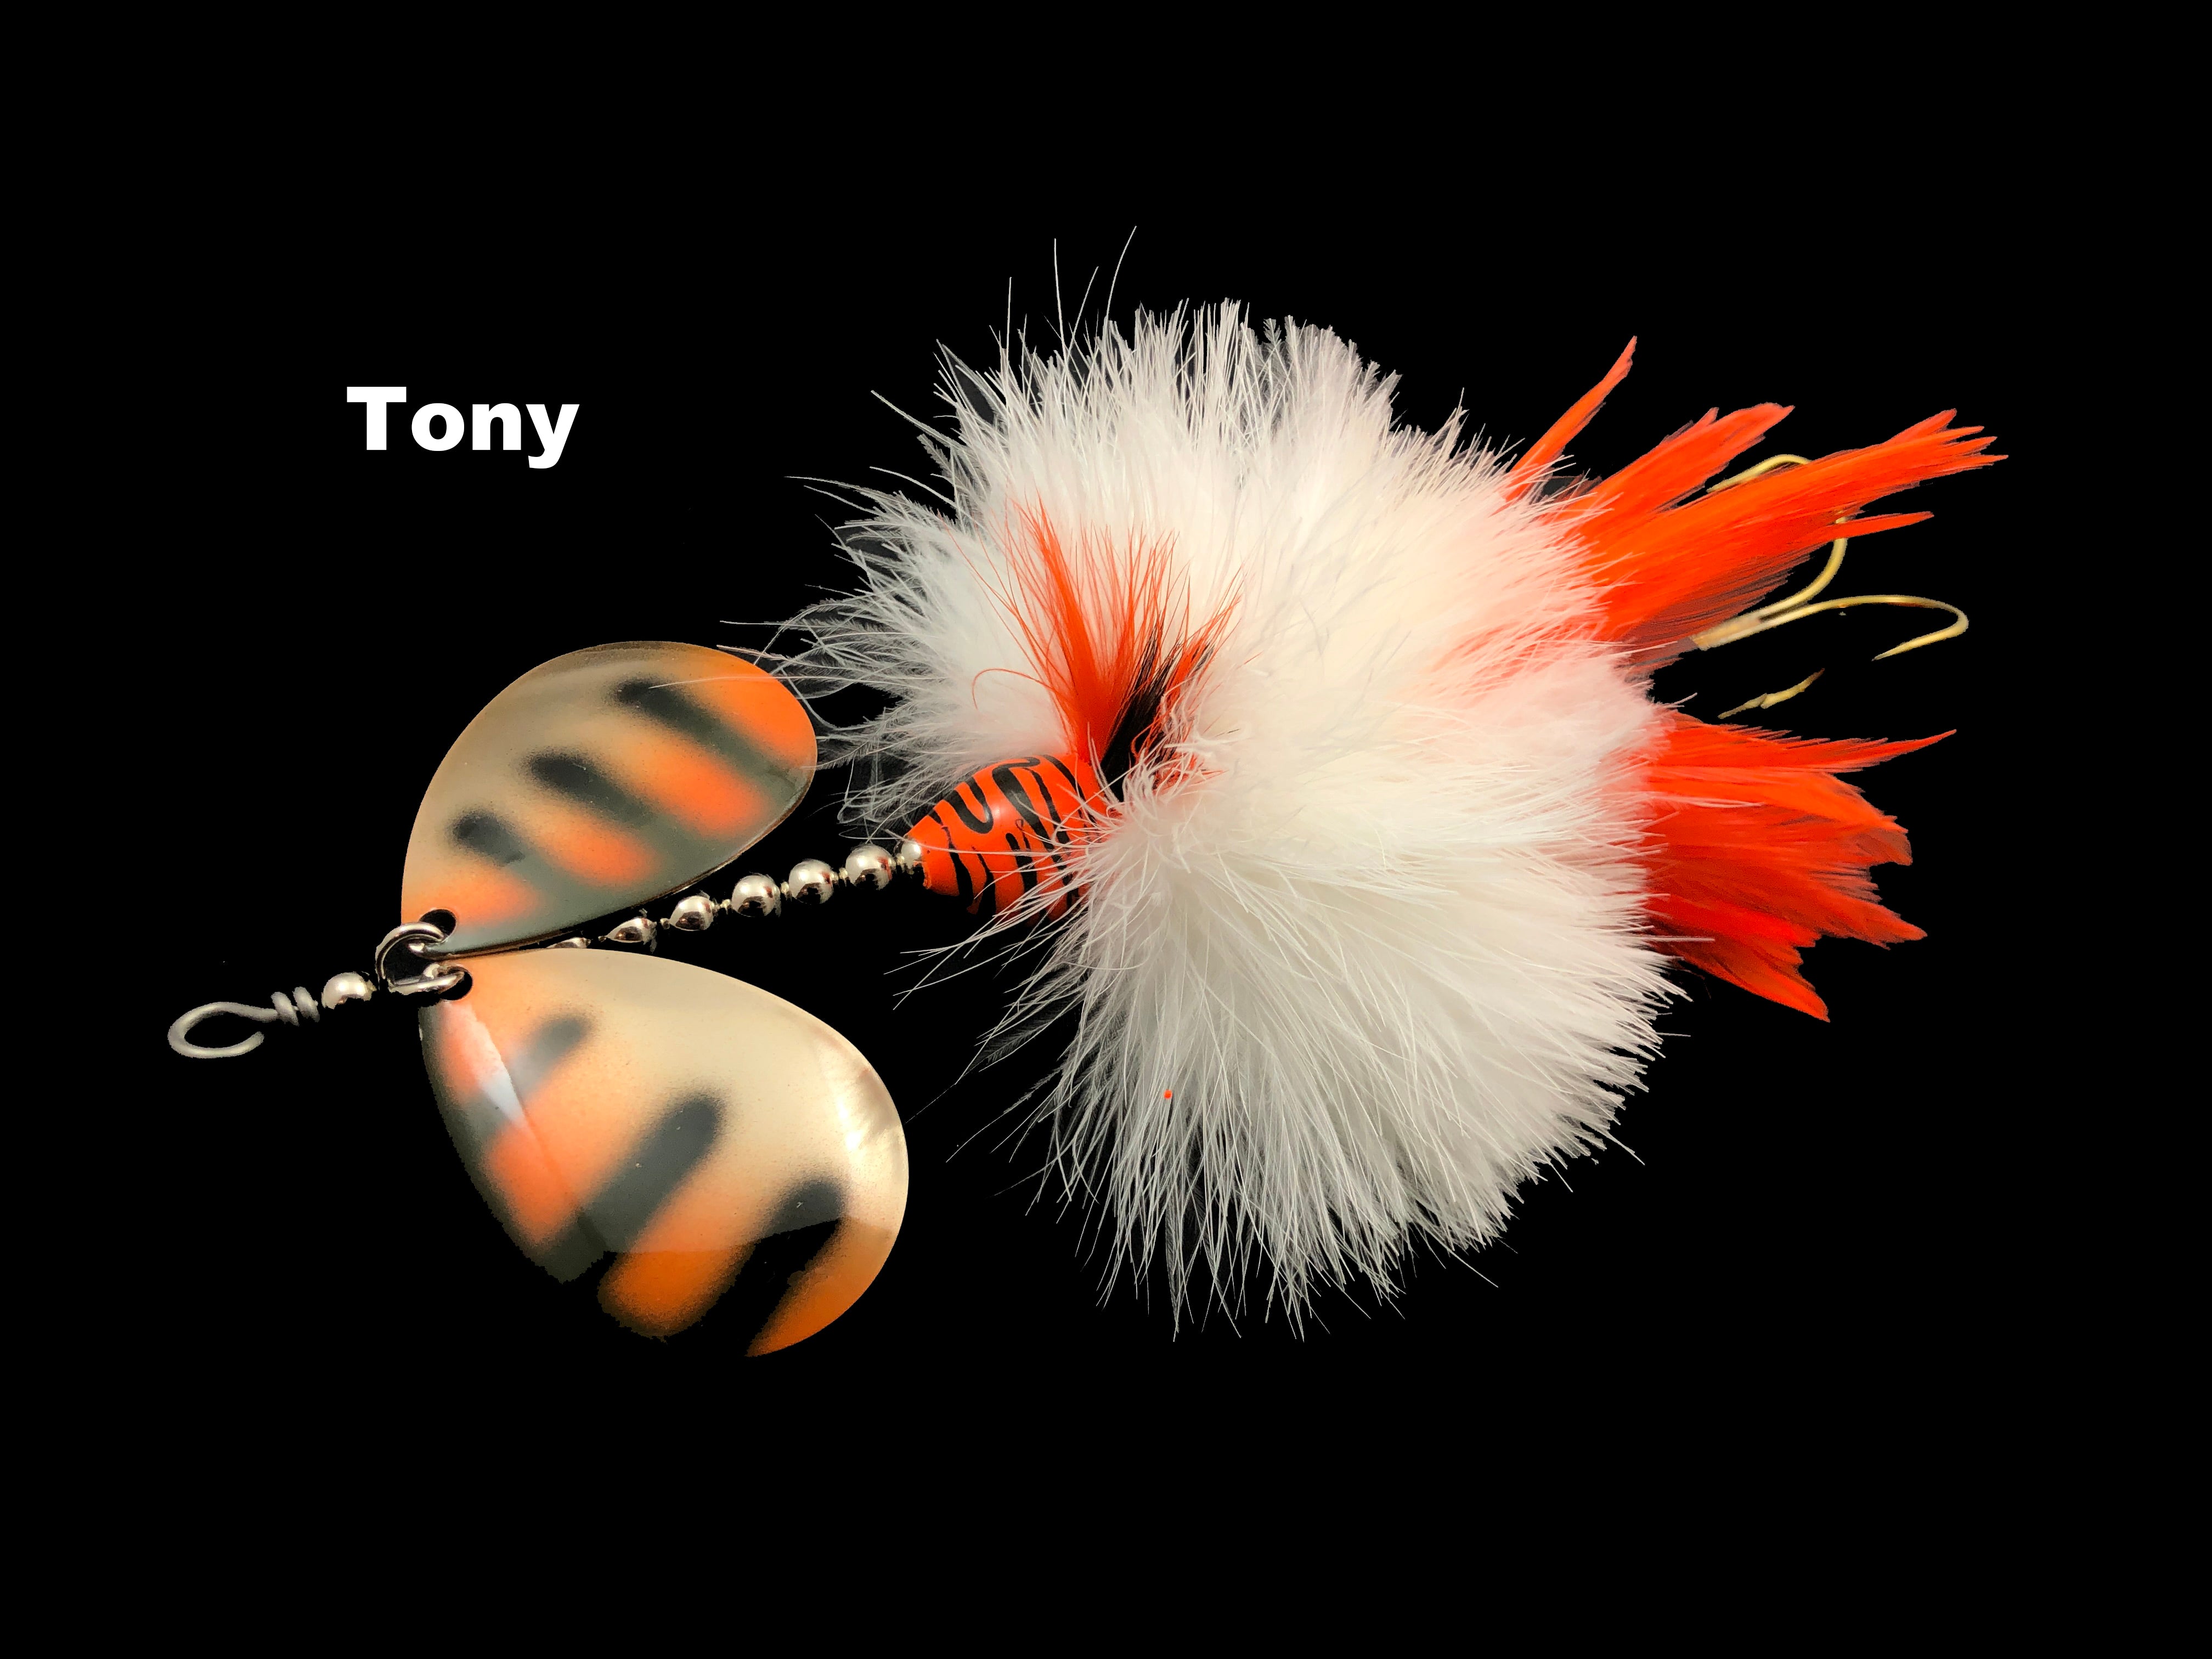 Palmered Marabou Jigs - Curly Tails - Speckled - Haggerty Lures